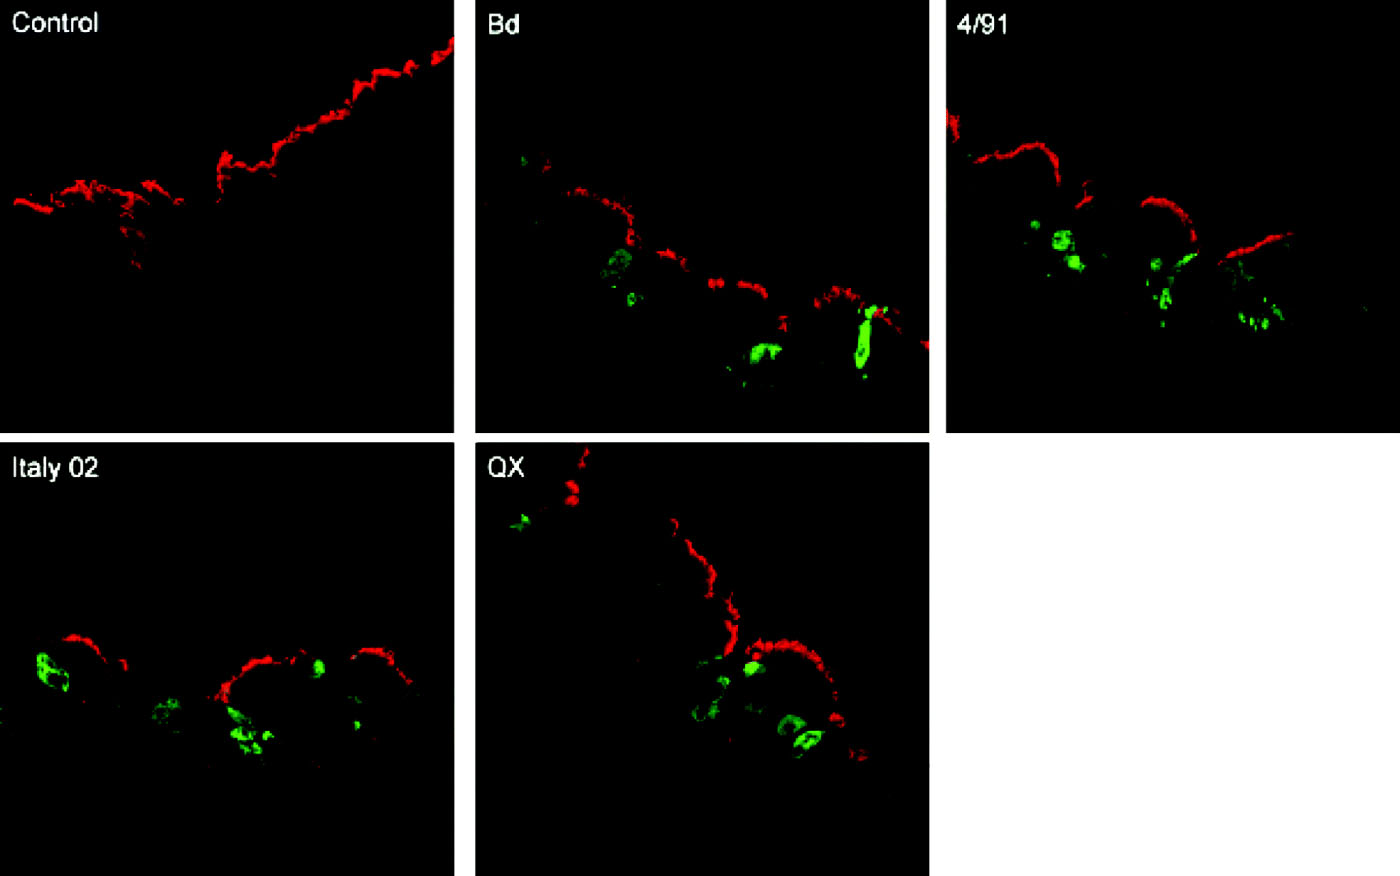 Figure 3.  Immunofluorescence analysis of cryosections prepared from IBV-infected tracheal organ cultures. At 24 h post infection, sections were stained with an anti-β-tubulin antibody to detect cilia (red) and with a monoclonal anti-N antibody to vizualize virus antigen (green). Bd, Beaudette.